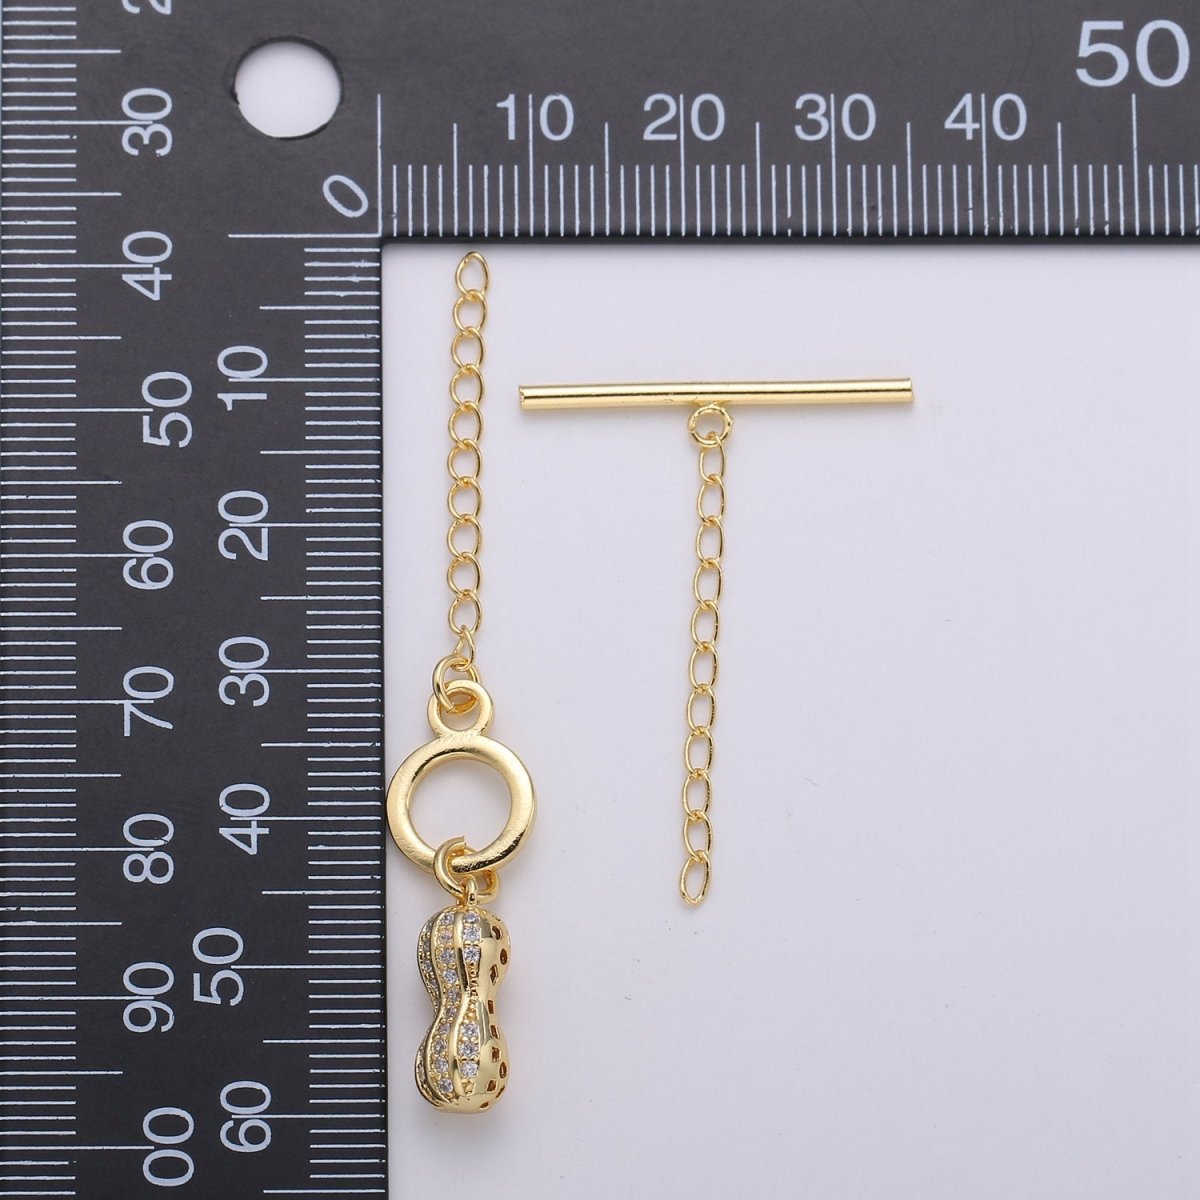 Micro Pave Toggle Clasp, 24K Gold Filled Toggle Clasps - Cubic Zirconia Necklace Connectors w/Soldered chain link for necklace bracelet, K-457 - DLUXCA